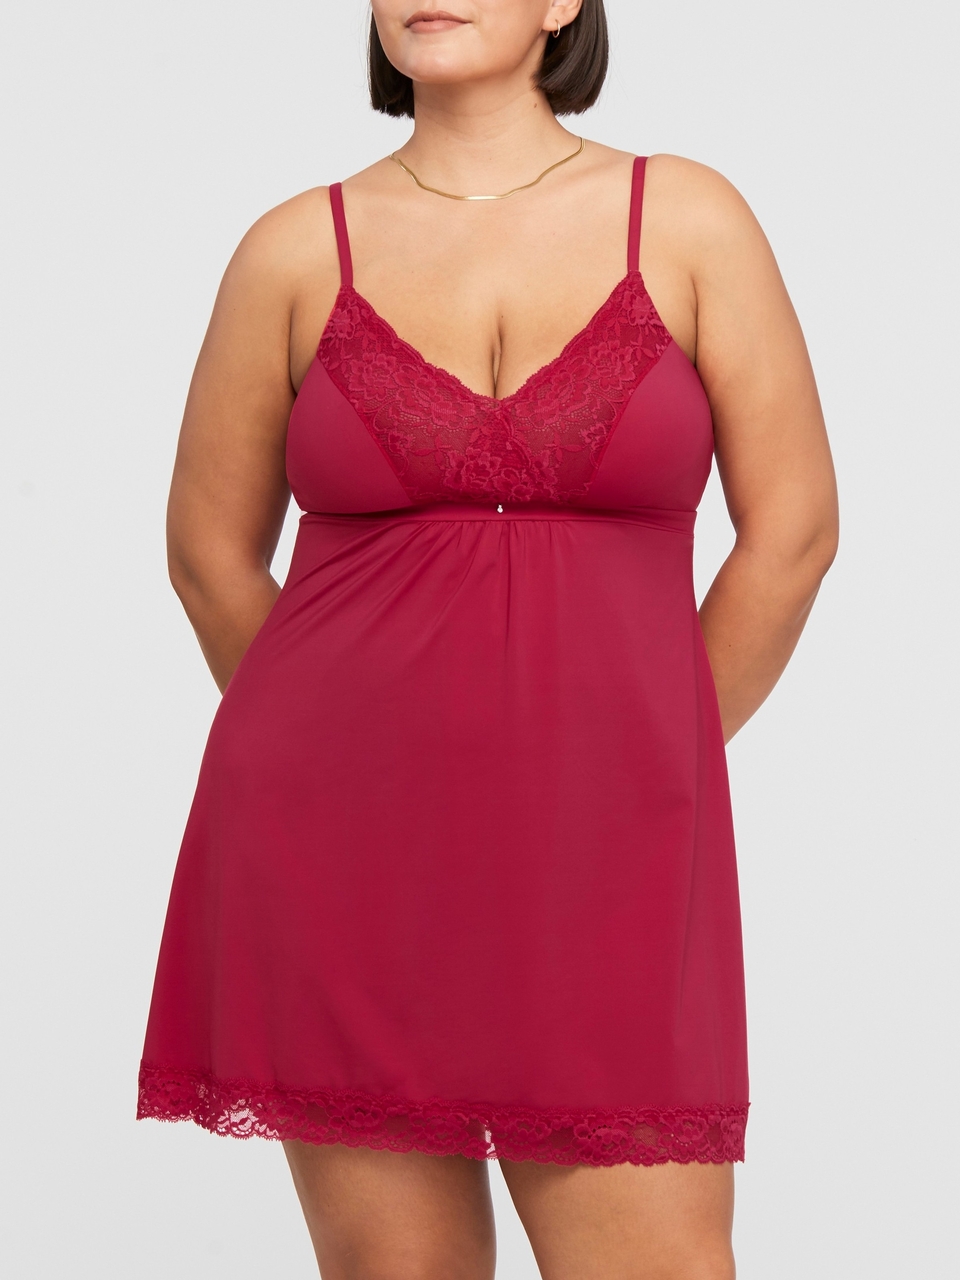 Bust Support Chemise-9394 – The Full Cup